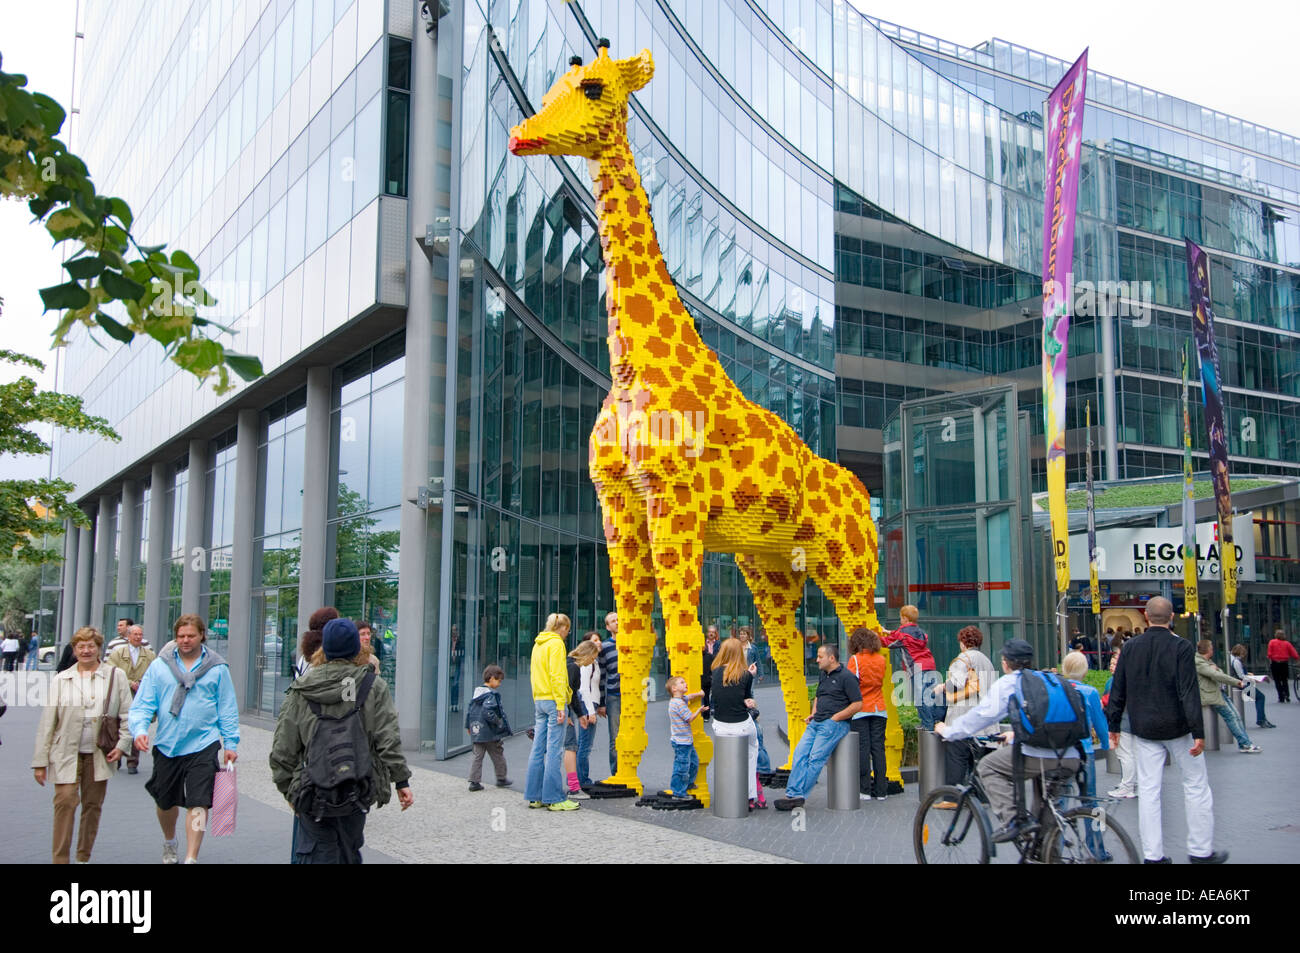 large figure TOY Giraffe made of lego brick ahead of SONY CENTER BERLIN people looking Stock Photo